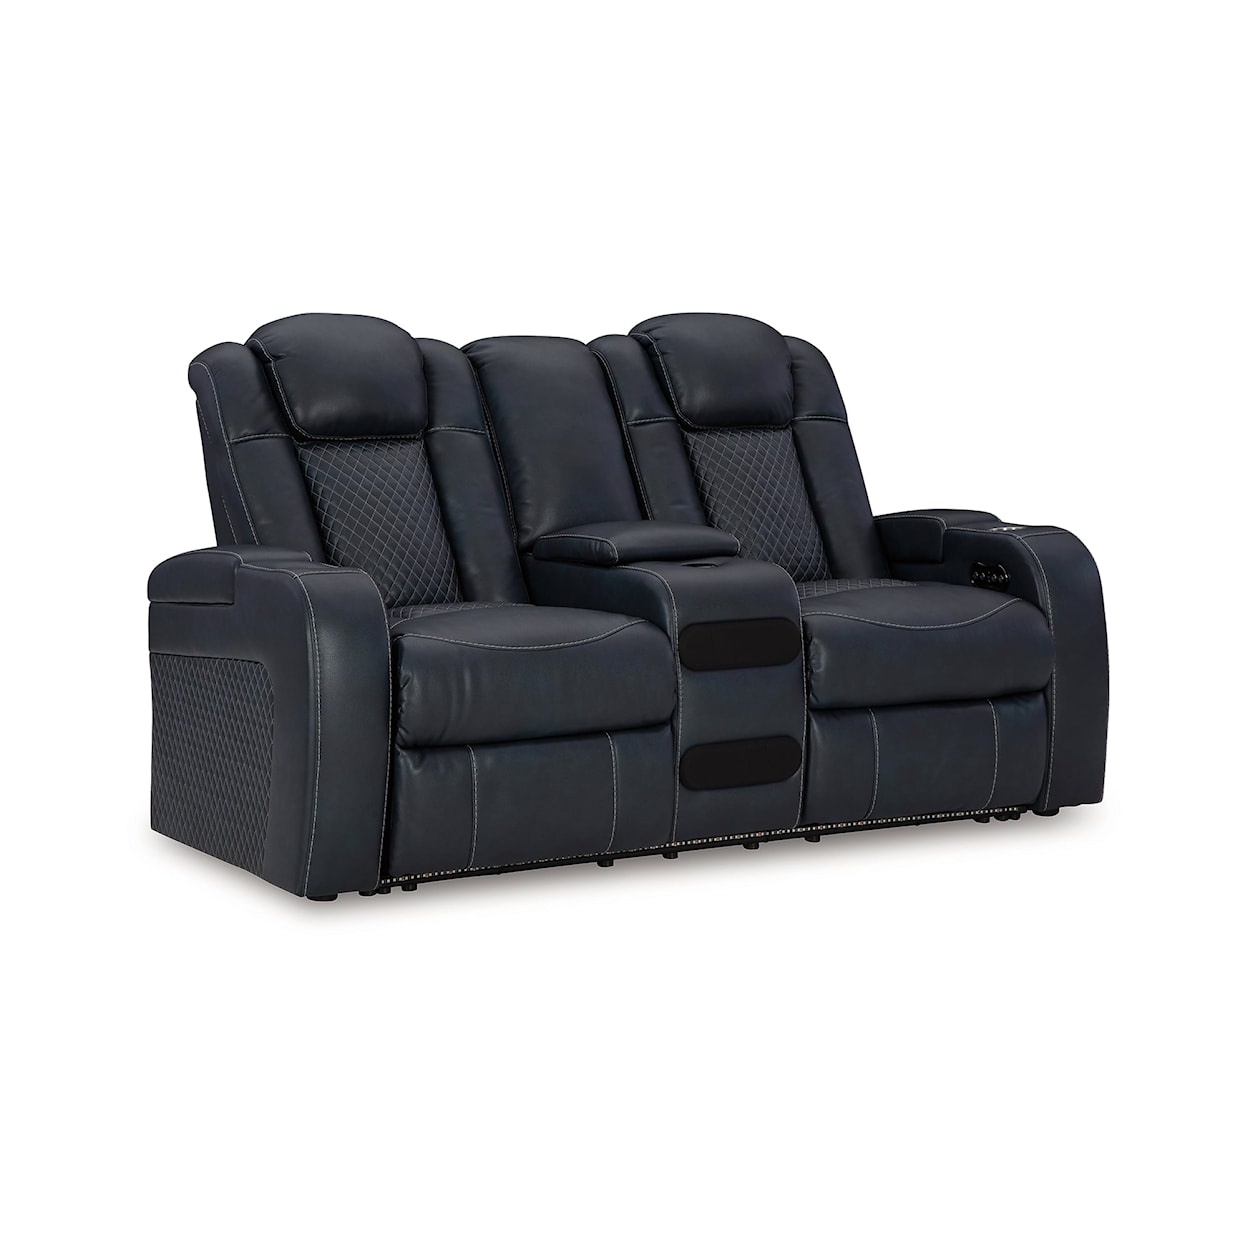 Michael Alan Select Fyne-Dyme Power Reclining Loveseat With Console